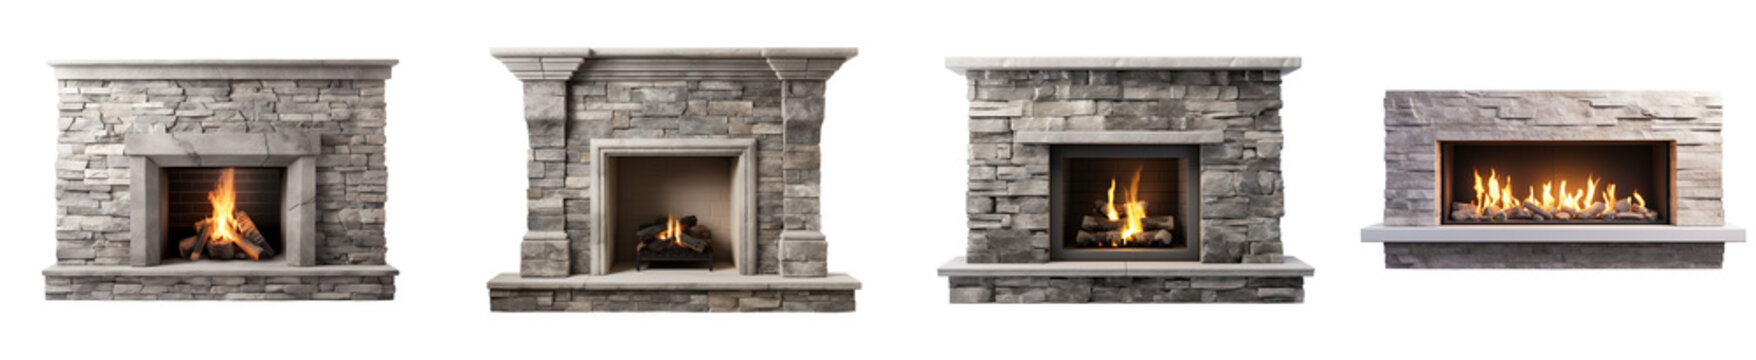 fireplace modern, classic and stone style.  beautiful lit fireplaces surrounded by modern tile. isolated on transparent background